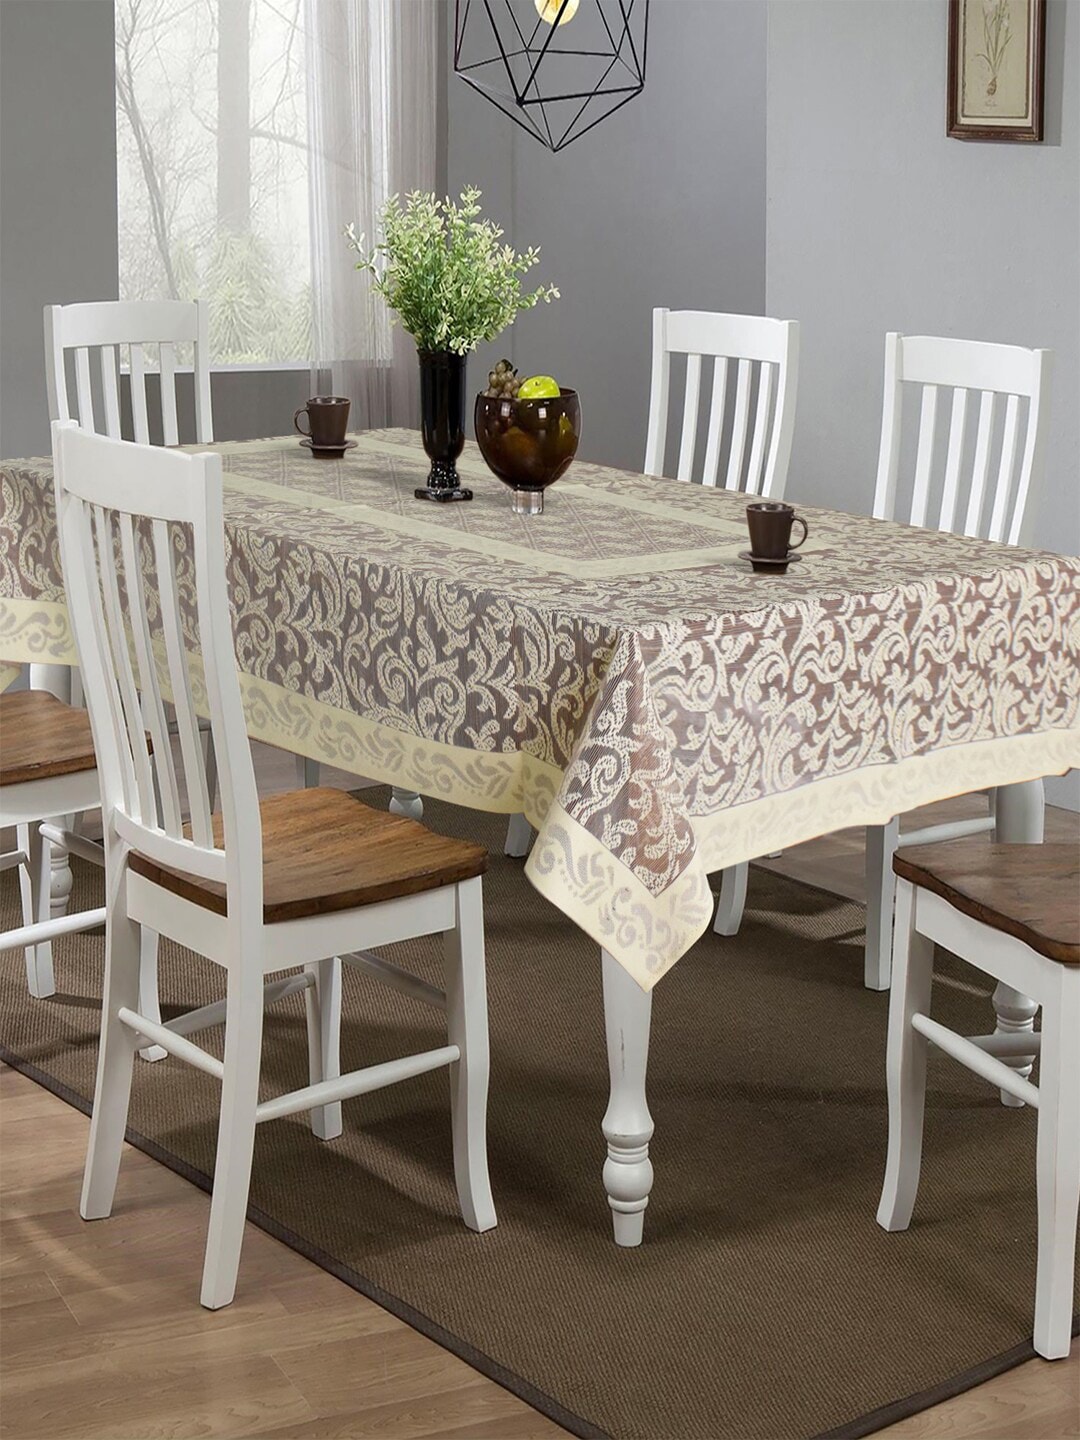 Kuber Industries Maroon & Cream 6-Seater Leaf Design Cotton Table Cover Price in India